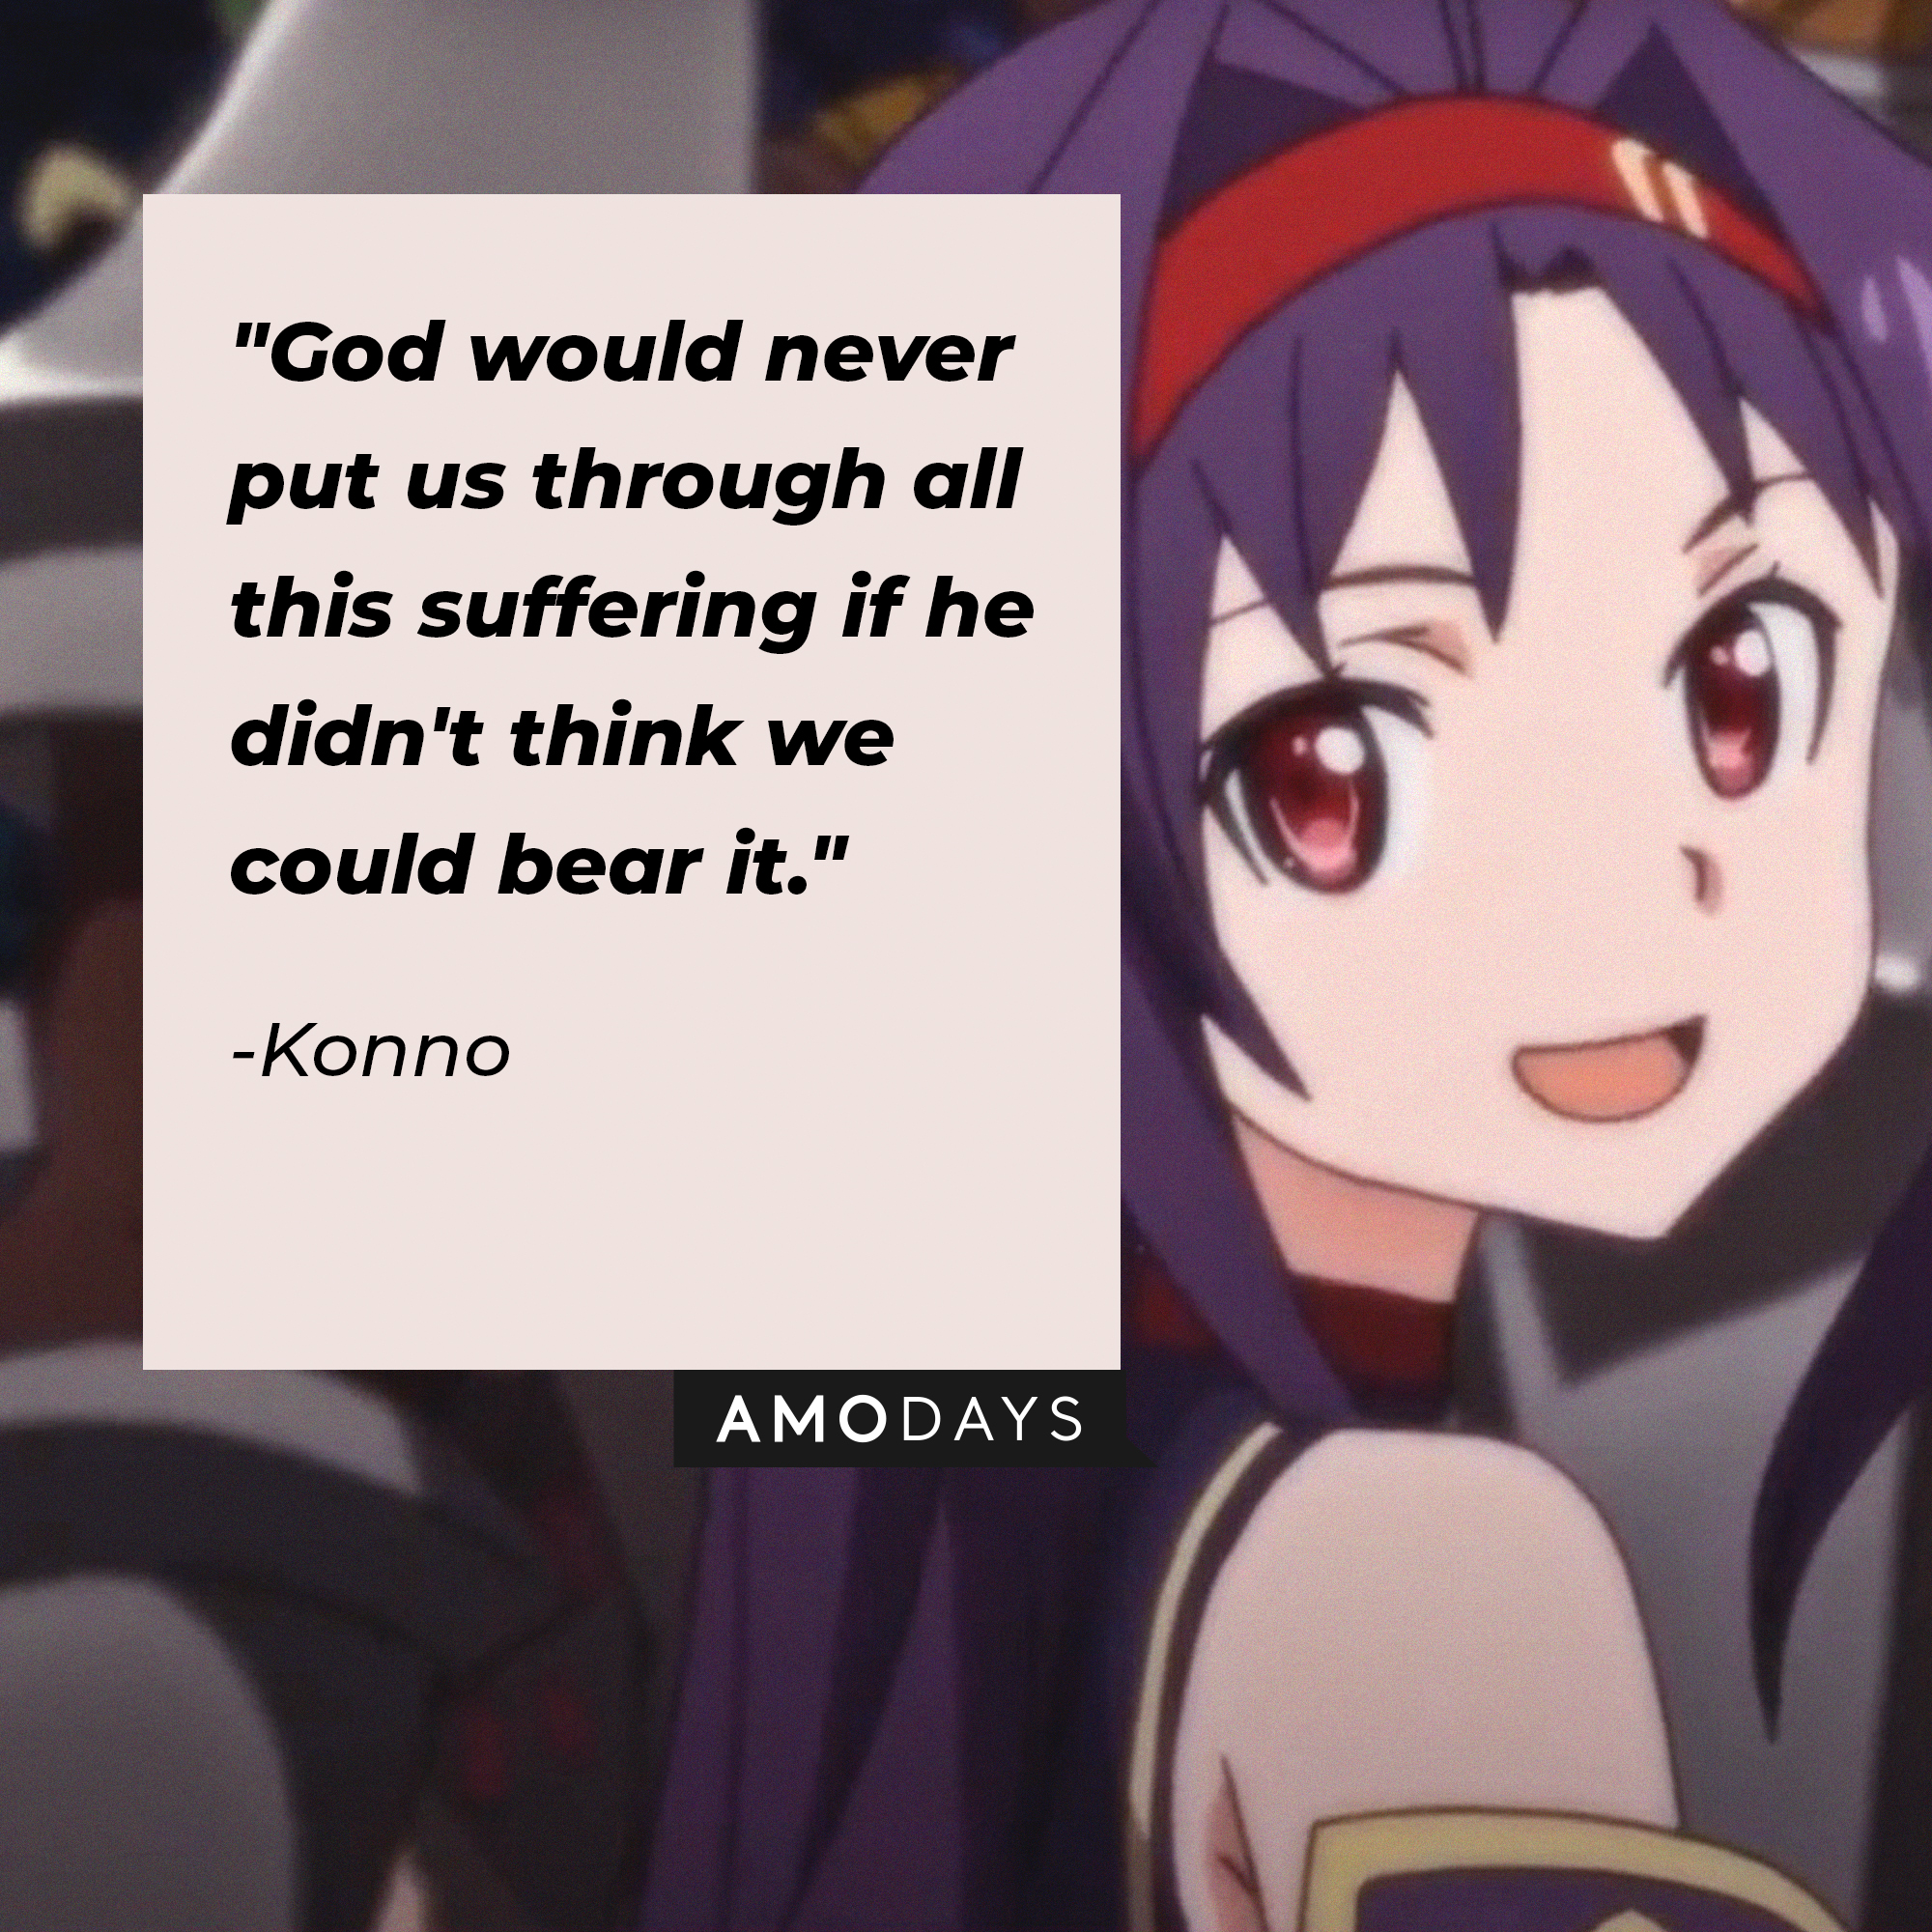 Konno's quote: "God would never put us through all this suffering if he didn't think we could bear it." | Source: Facebook.com/SwordArtOnlineUSA